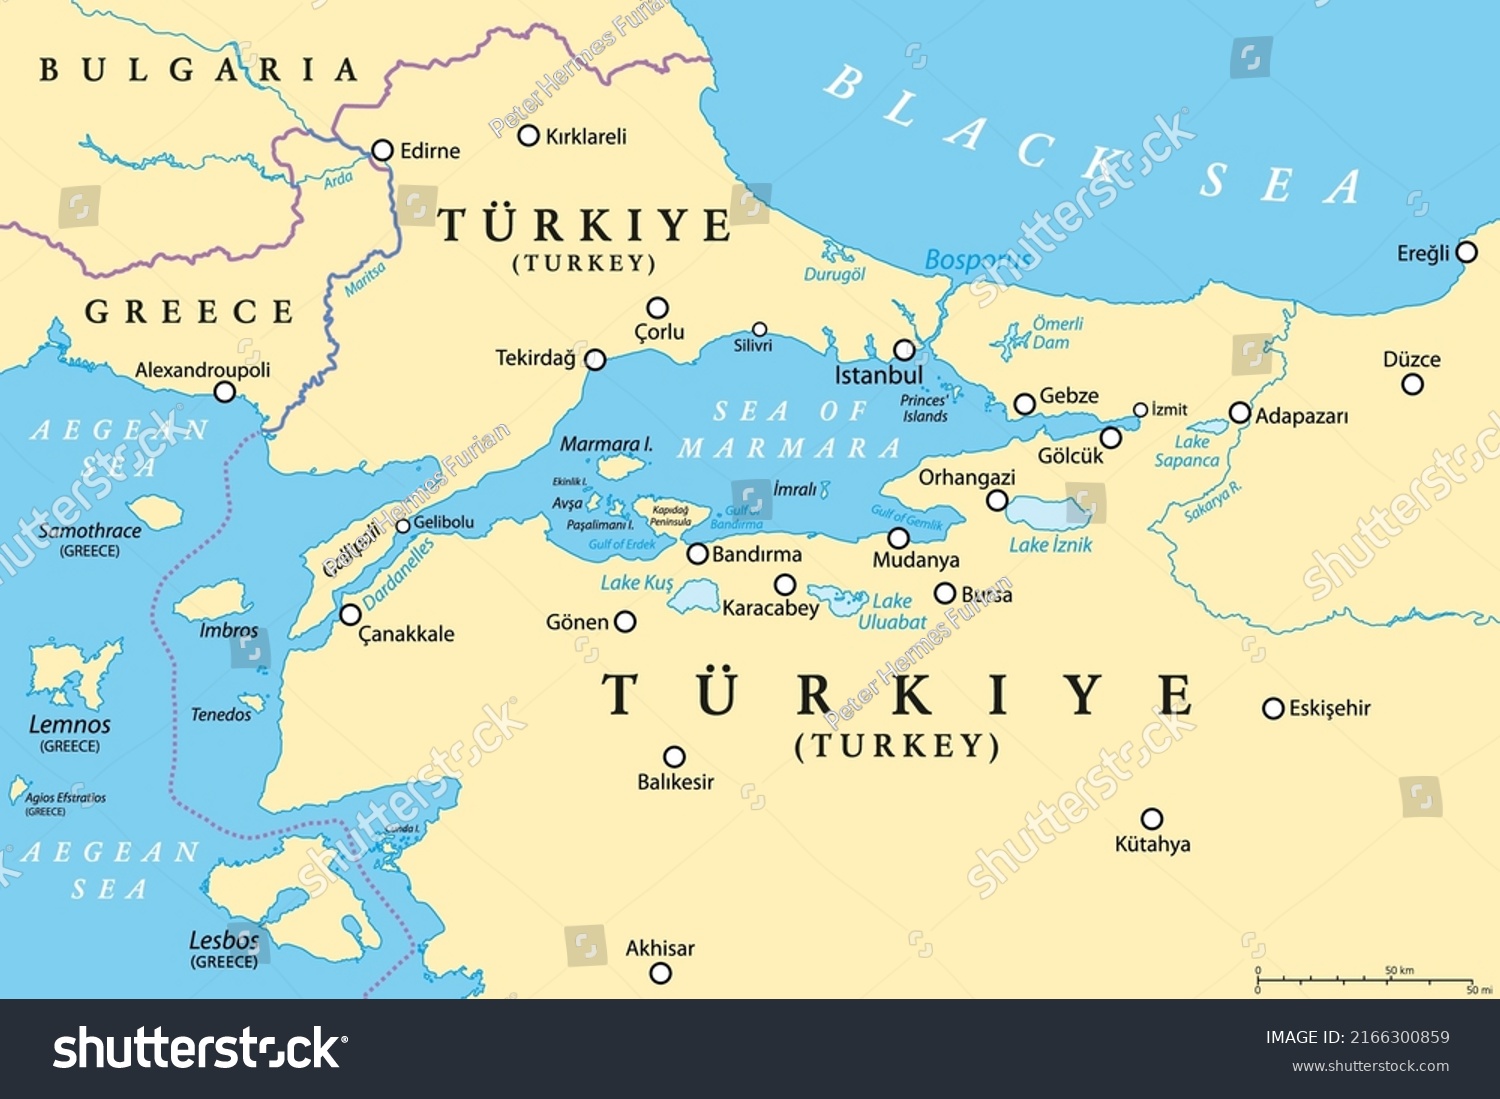 Bosporus and Dardanelles, political map. The Turkish Straits, internationally significant and narrow waterways in Turkey. Passages, connecting the Aegean Sea and the Sea of Marmara with the Black Sea. #2166300859